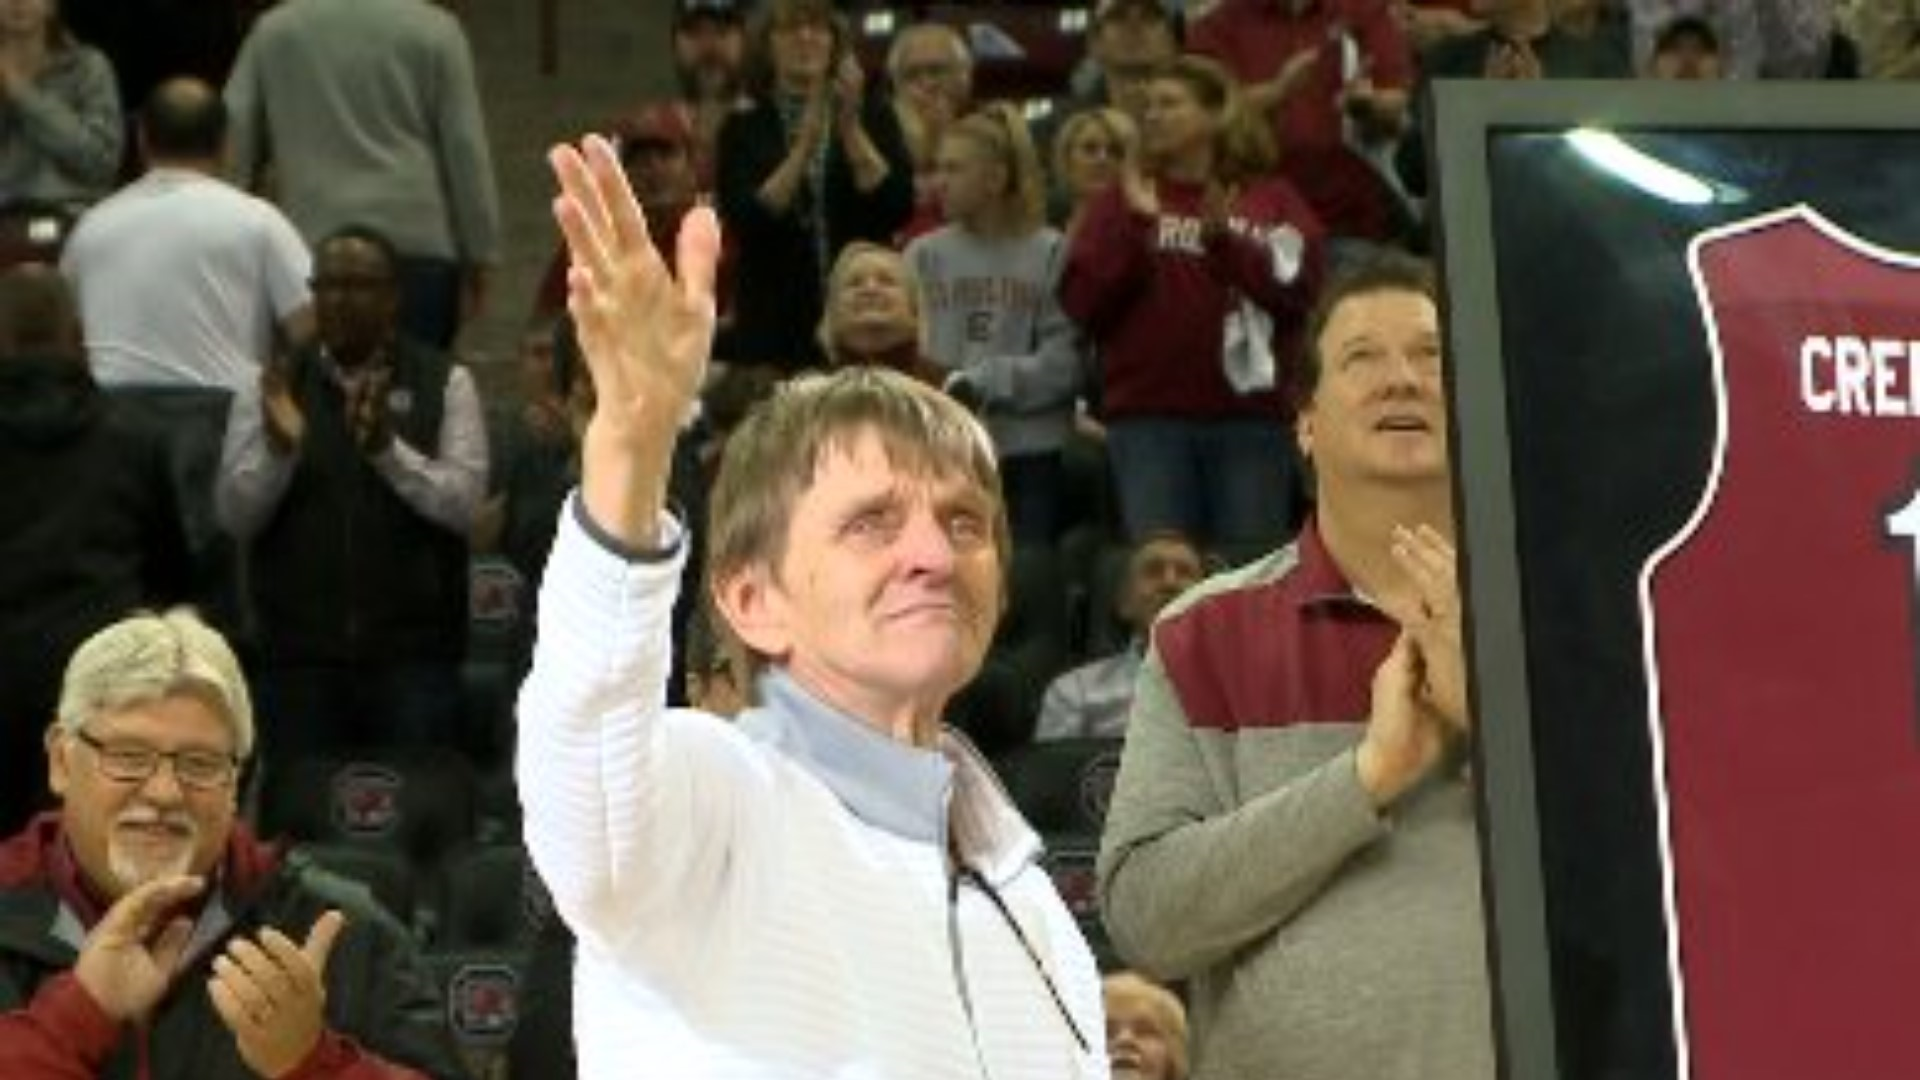 He served as an equipment manager for 40 years in USC Athletics and now Mac Credille is officially recognized as a South Carolina Basketball legend.